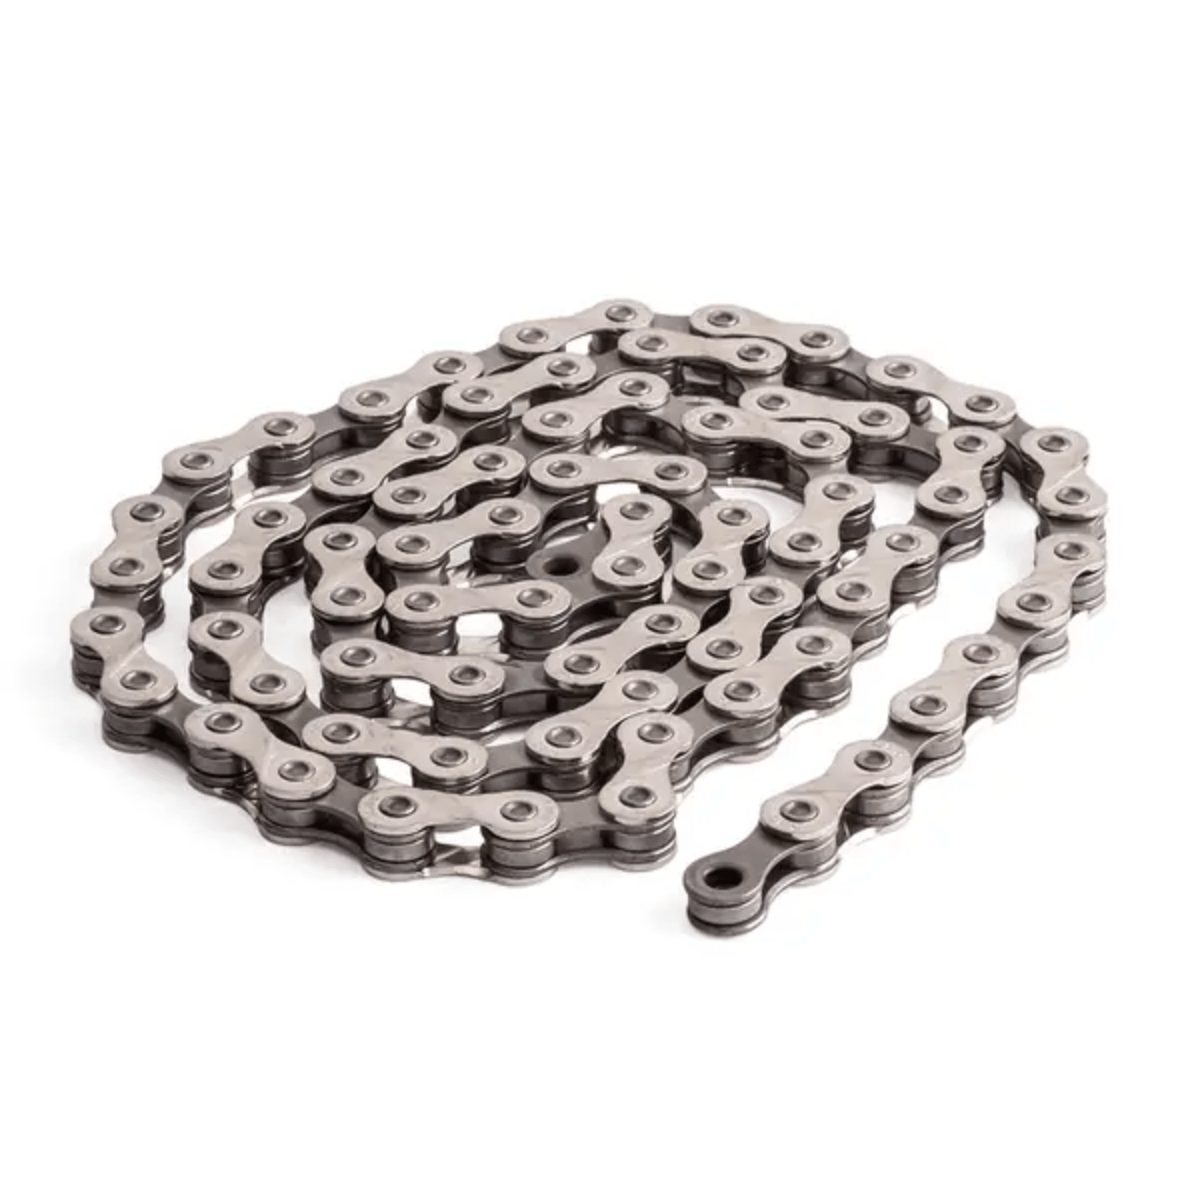 SKF TKSA 51-EXTCH 2 × Extension chains of 1 m (3.3 ft.) for shaft diameters up to 450 mm (17.7 in.) - Apollo Industries llc